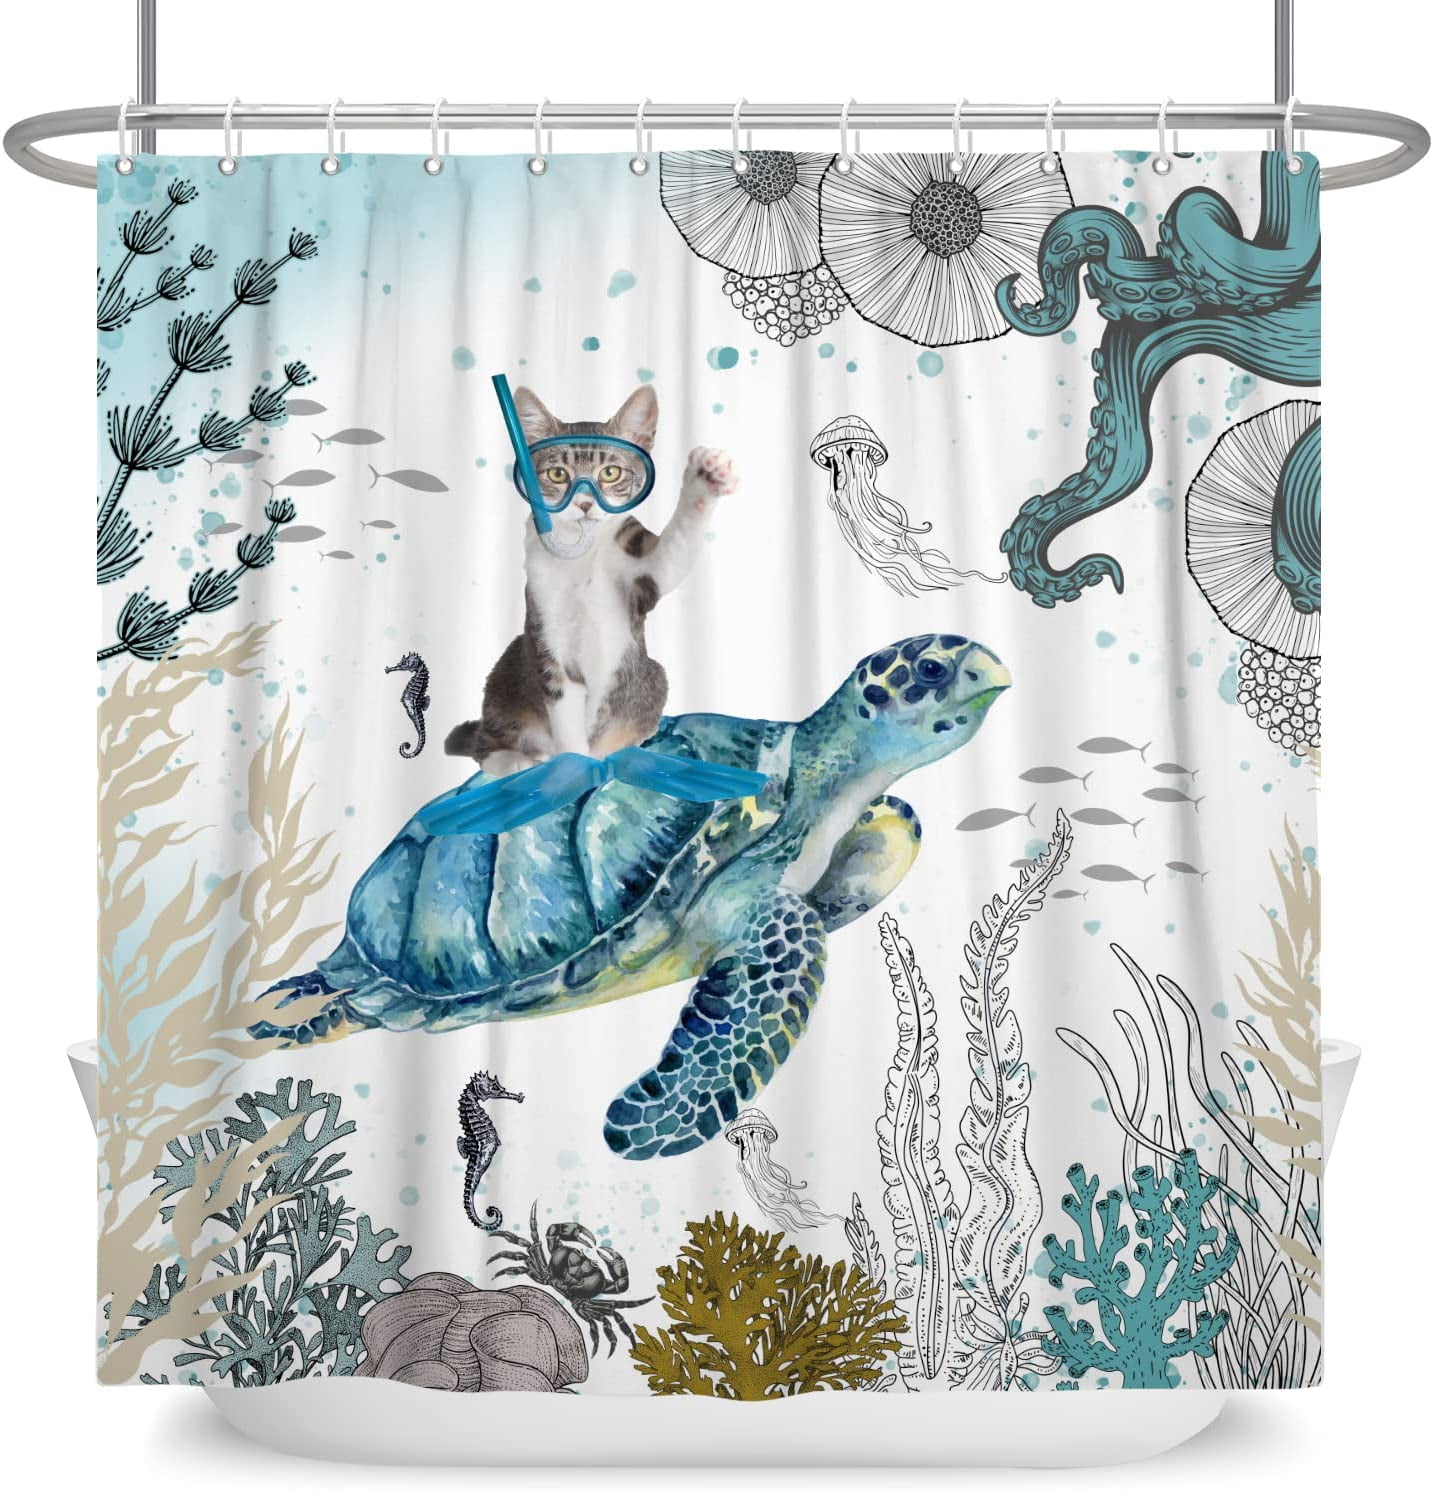 aoselan Tropical Dolphin Shower Curtain Ocean Theme Fantasy Colorful Fishes  Coral Funny Marine Life Shower Curtain for Kids Bathroom Curtain Polyester  Fabric with Hooks 36x72 